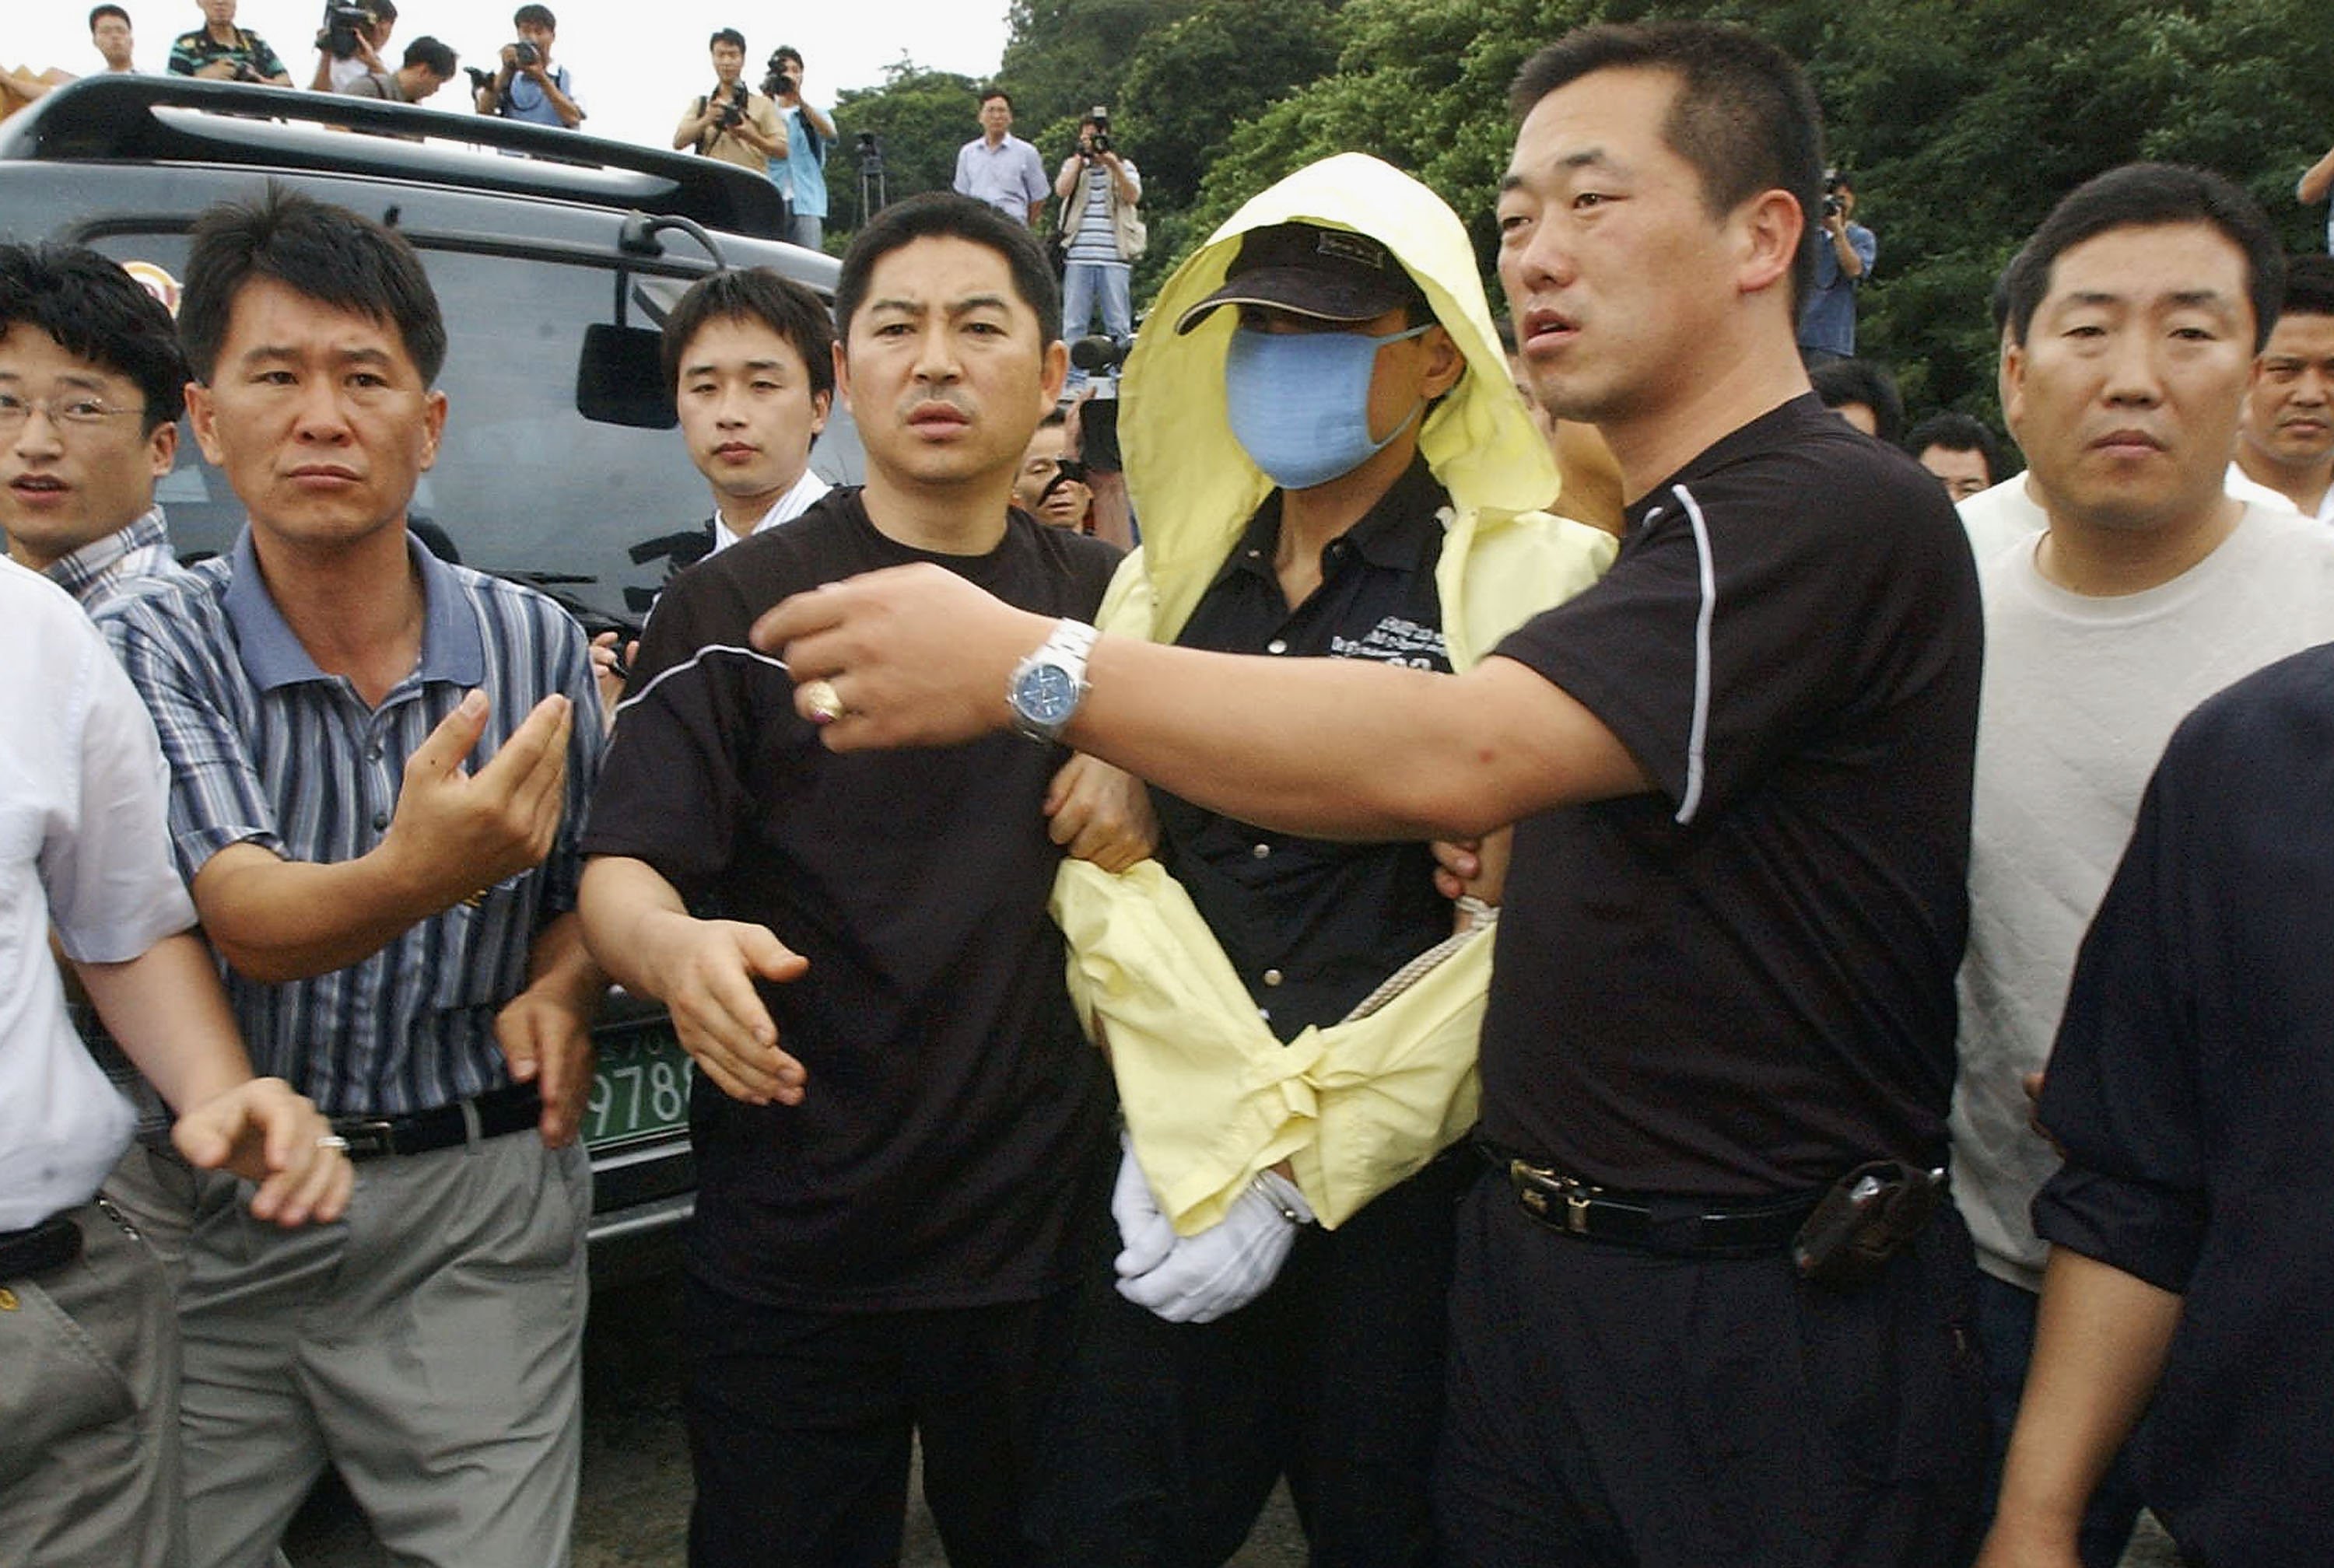 Yoo Young-chul after his arrest being held by police wearing a yellow coat.